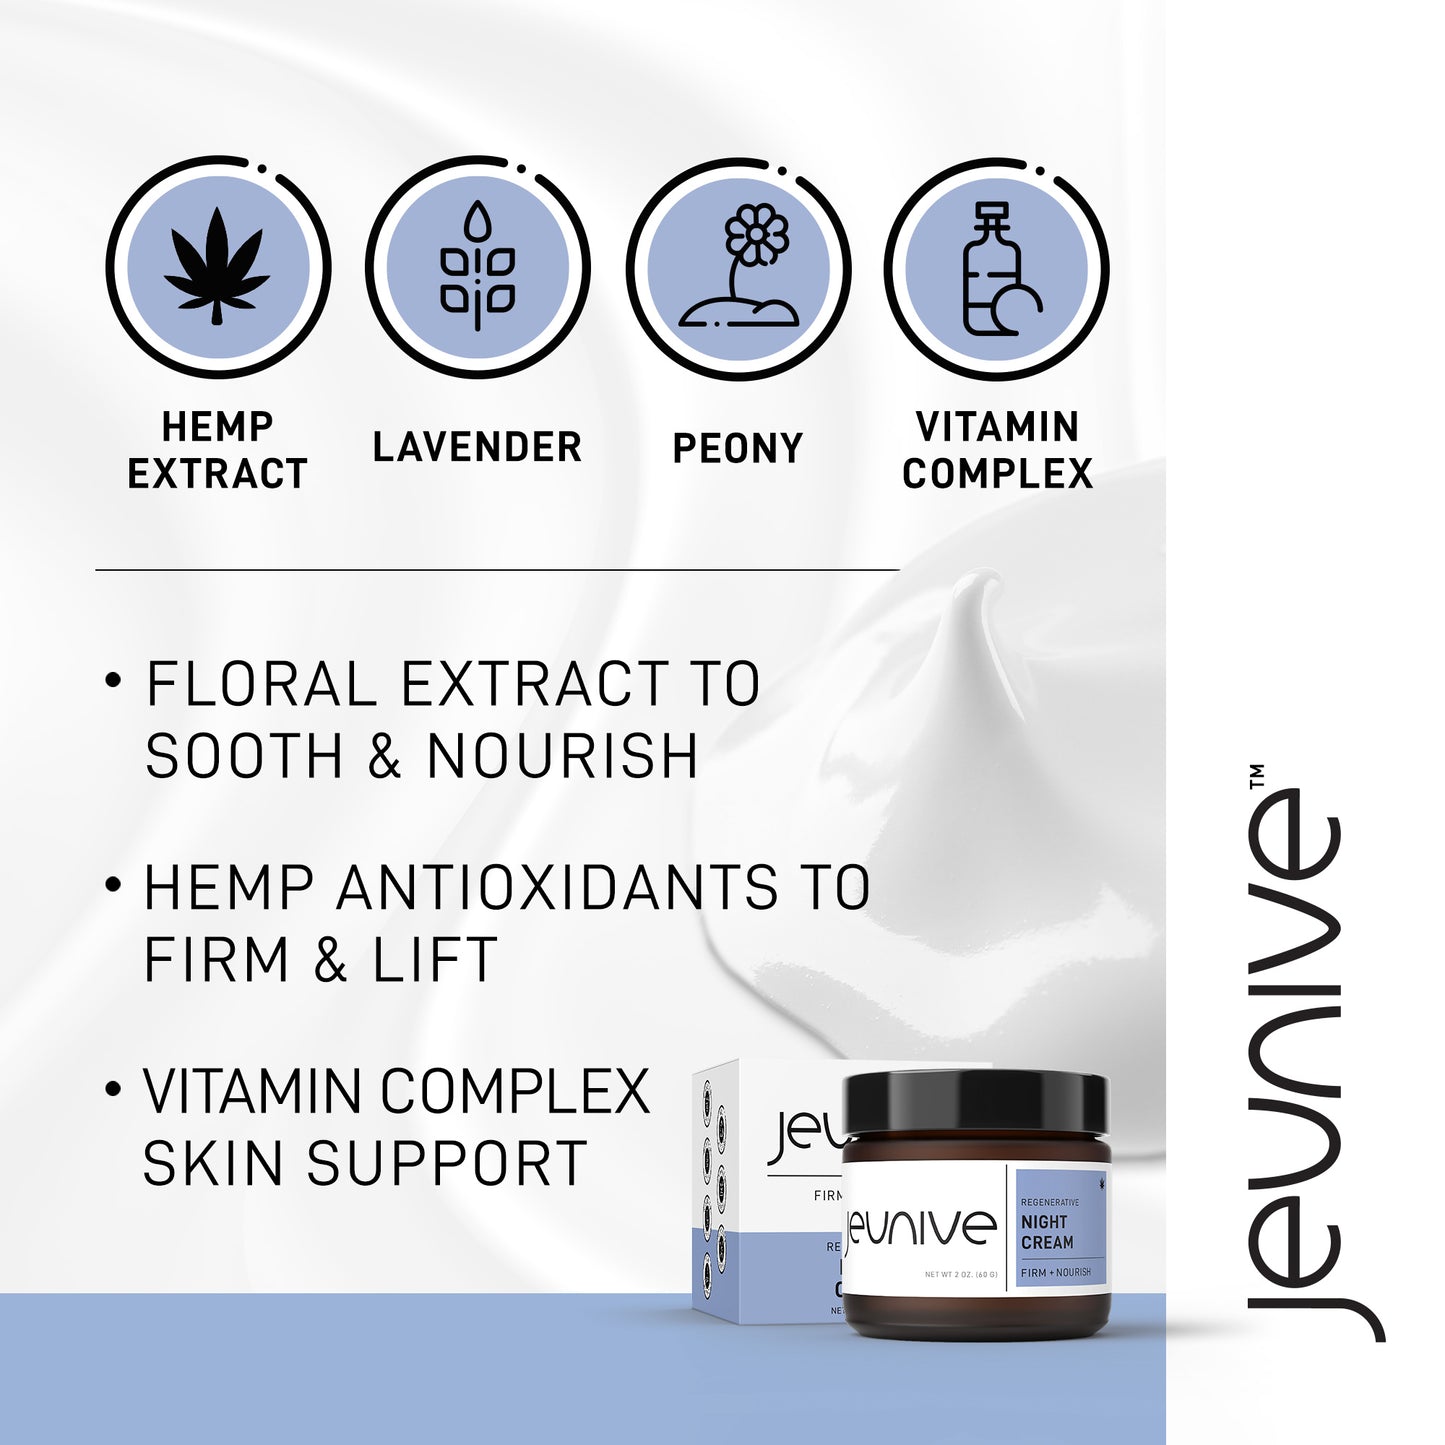 Jeunive Regeneartive Night Cream, Lavender, Peony, Vitamin Complex, Sooth and Nourish, Firm, Lift and Sooth your Skin.